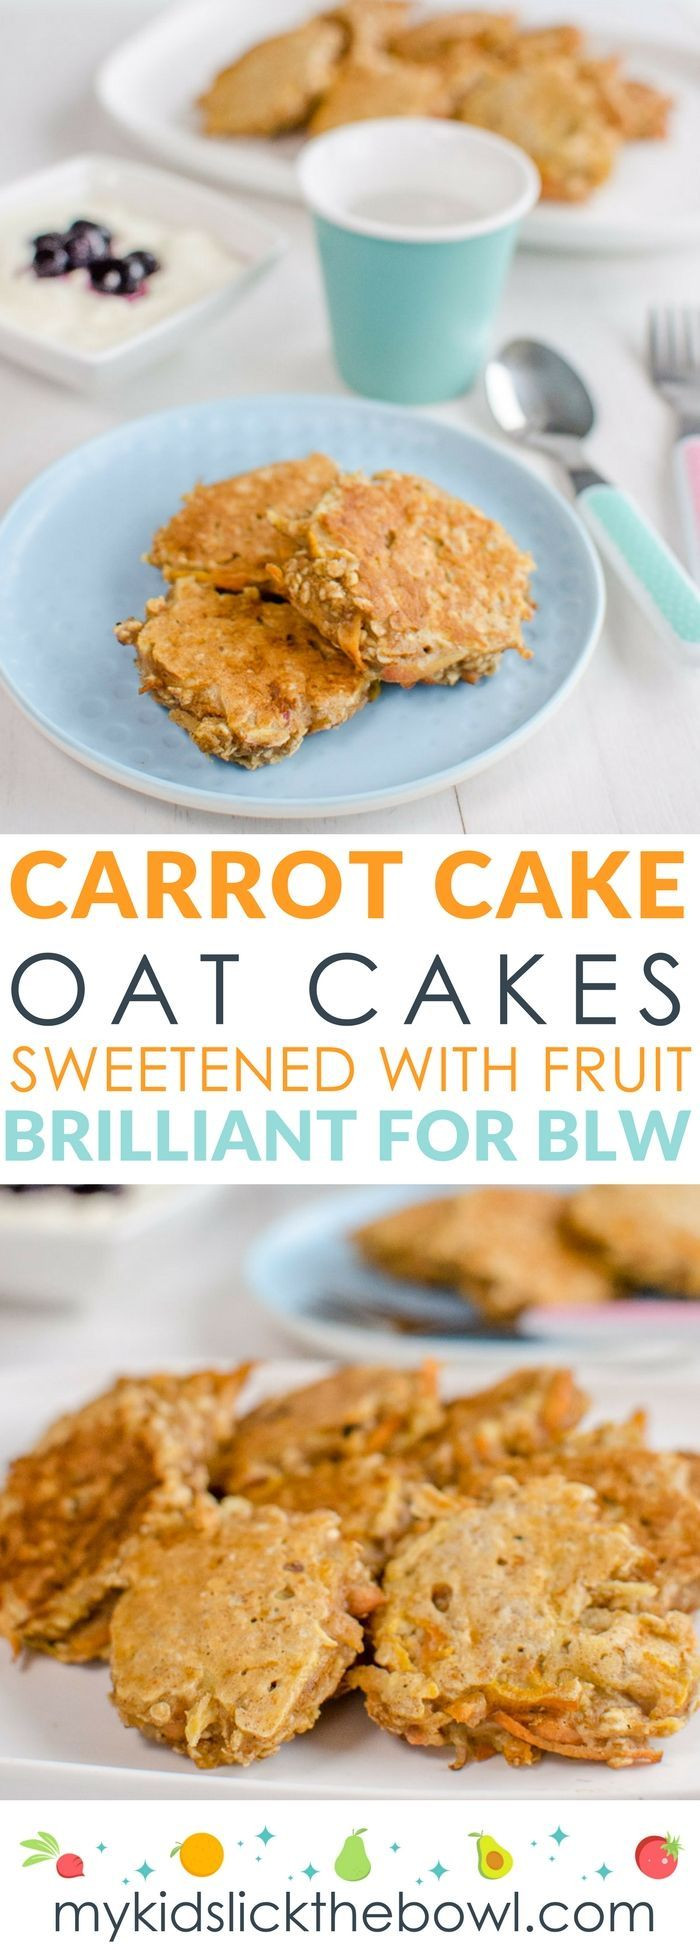 Carrot Cake Recipe With Baby Food
 Carrot Cake Oat Cakes Recipe